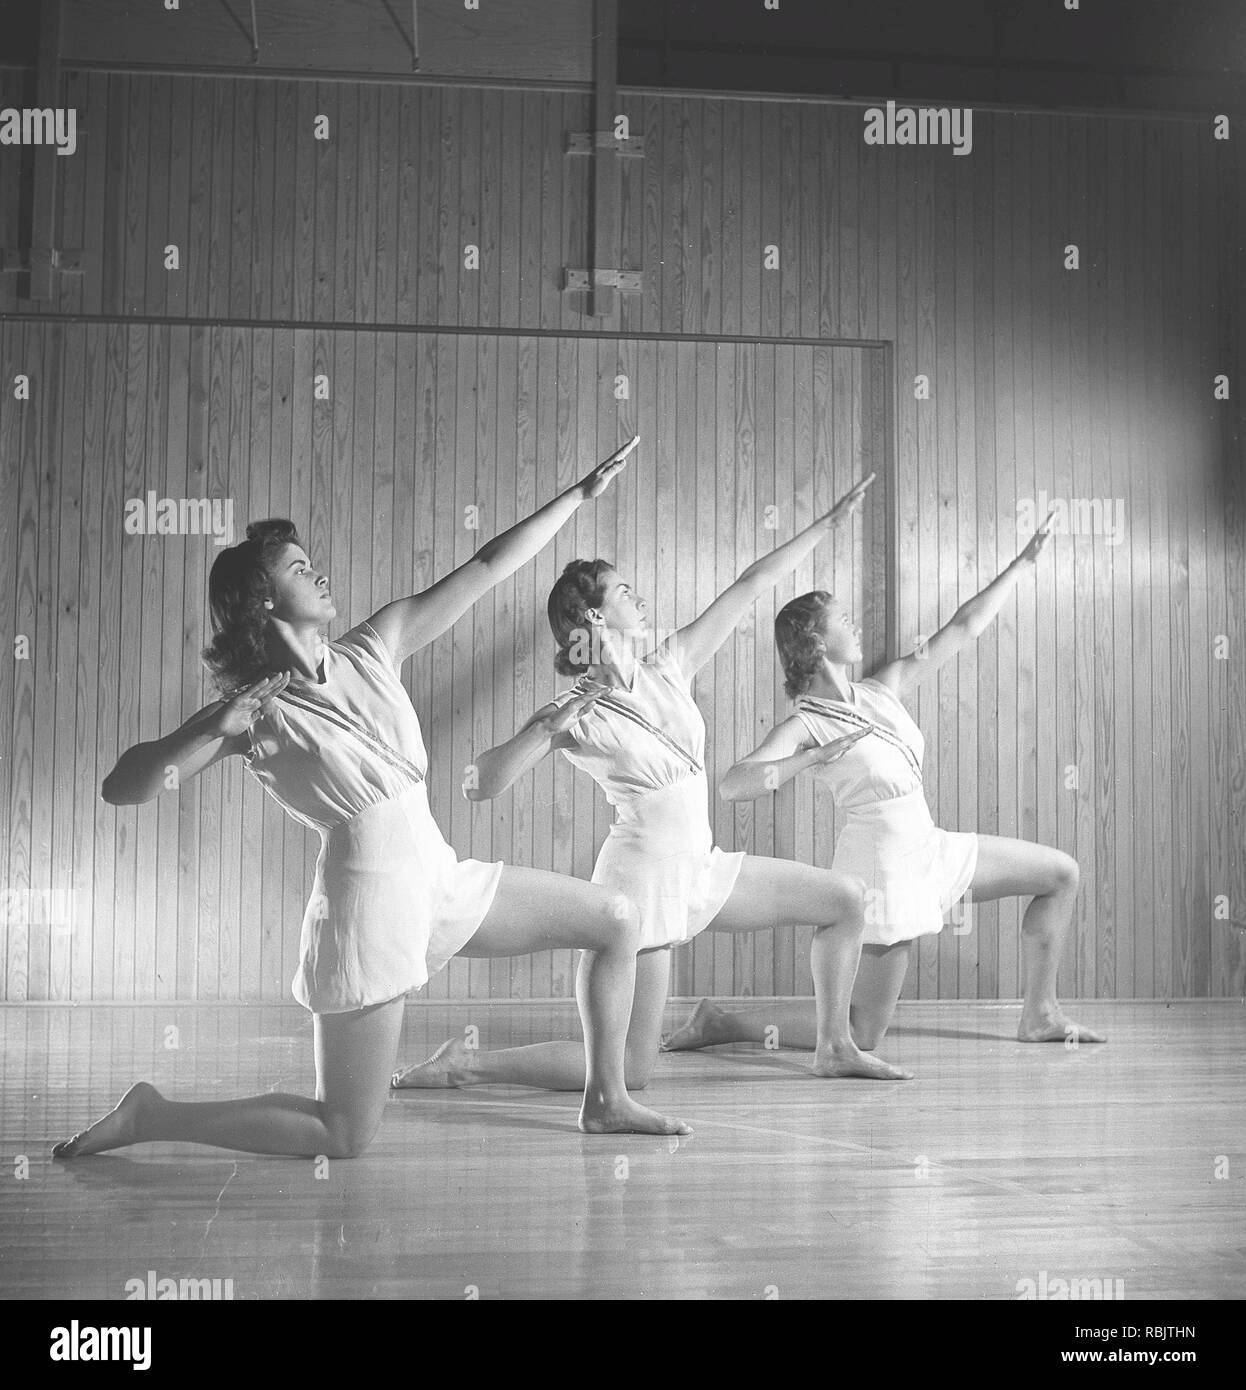 Gymnastics in the 1940s. Three young female gymnasts are practicing together and doing the same movement. 1940s Sweden Photo Kristoffersson ref M107-1 Stock Photo